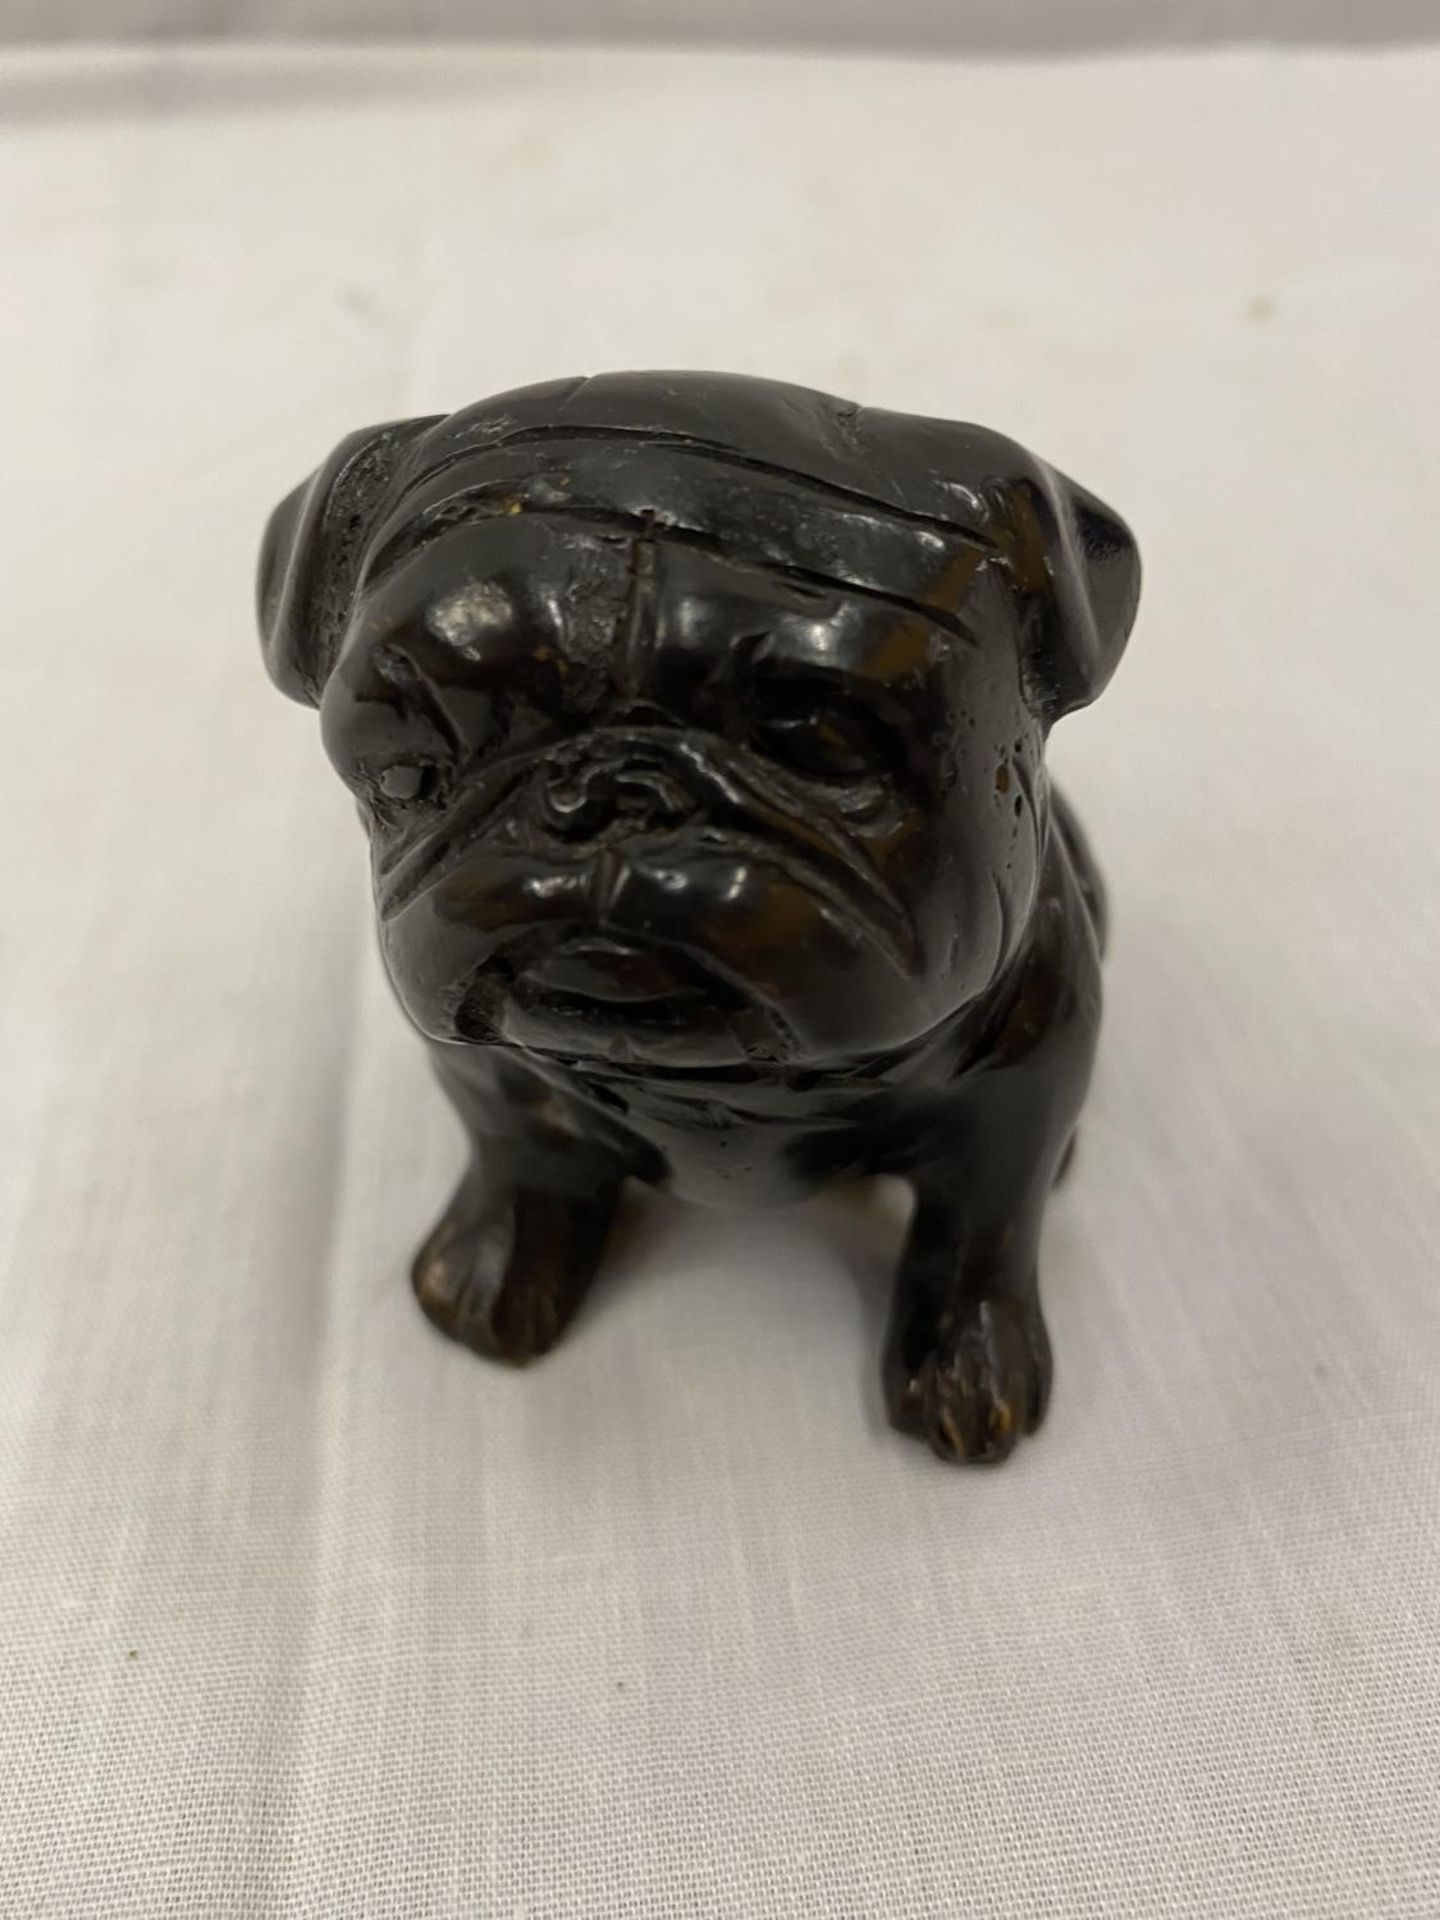 A PAIR OF BRONZE BULLDOGS, ONE SITTING AND ONE LAYING DOWN, HEIGHT 7CM AND 4CM - Image 19 of 22